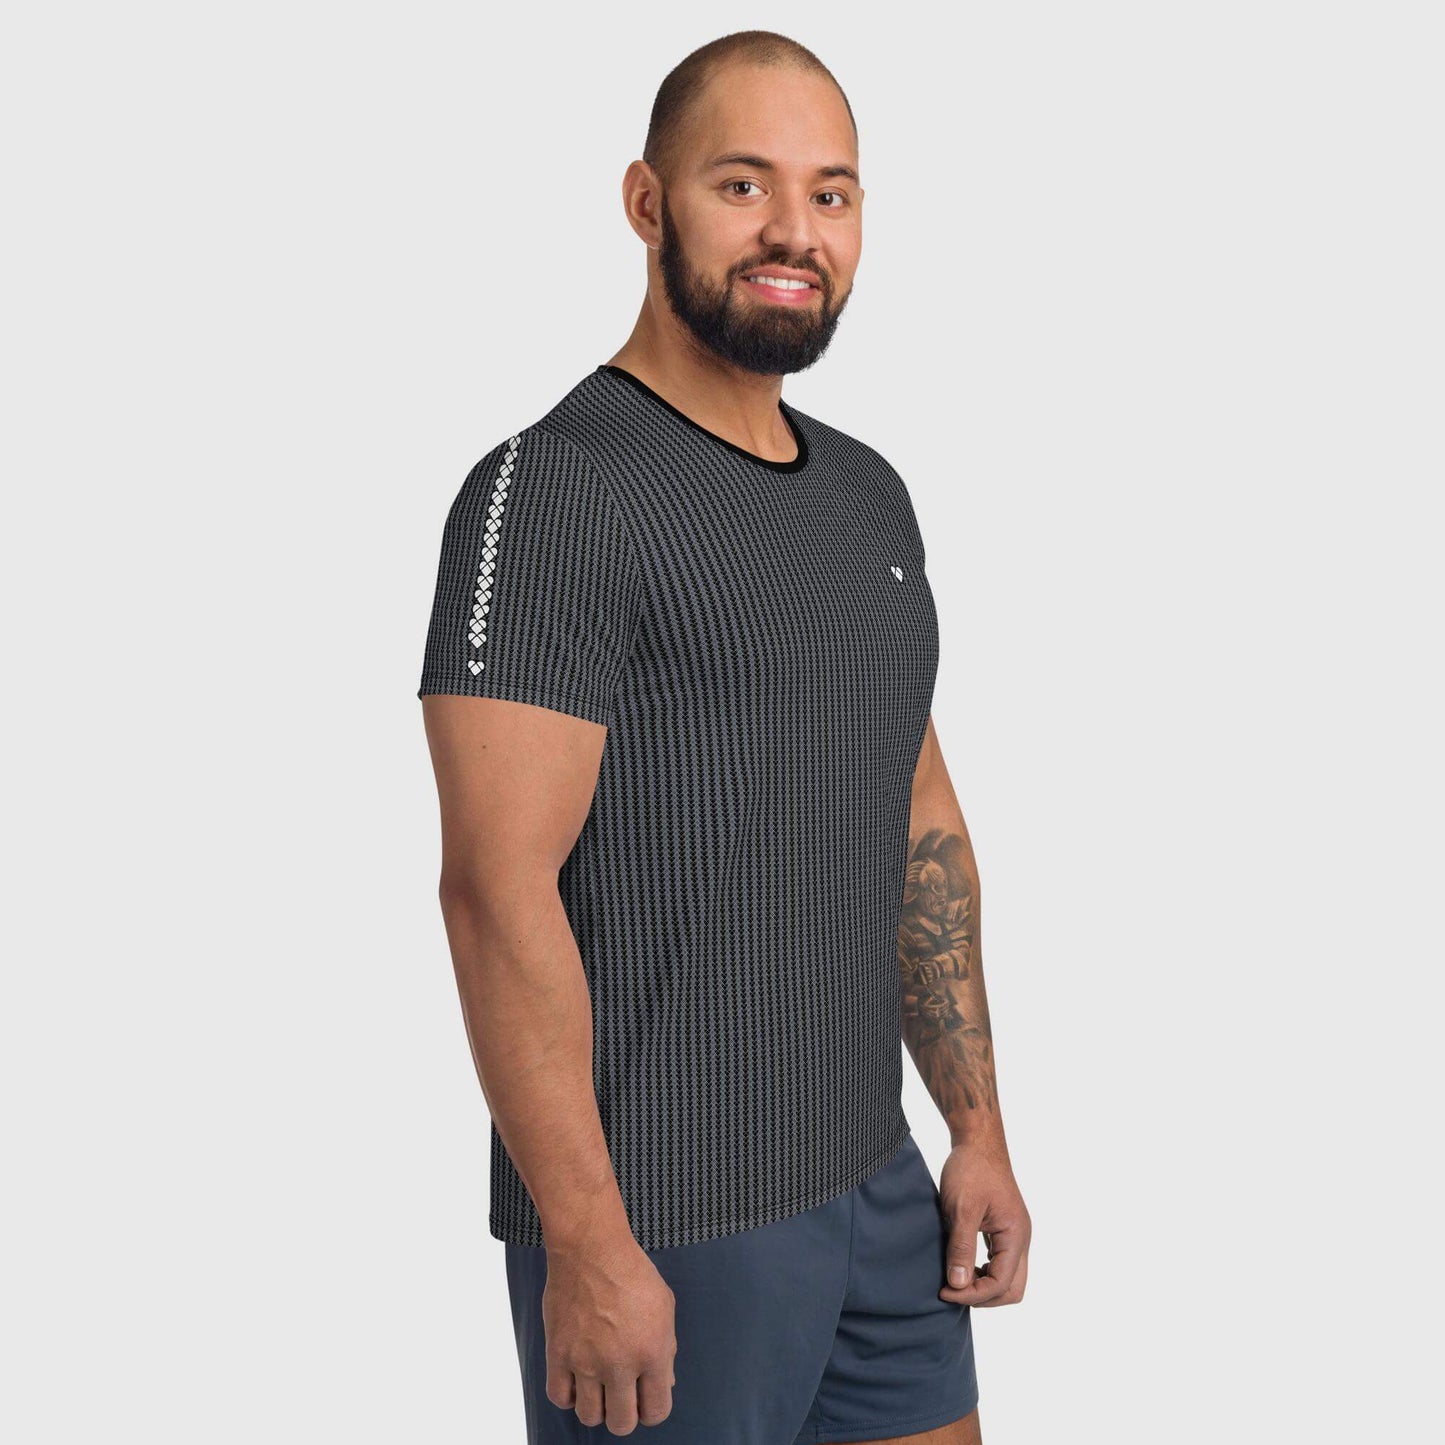 Men's workout shirt with heart design from Amor Primero Capsule Collection, male model